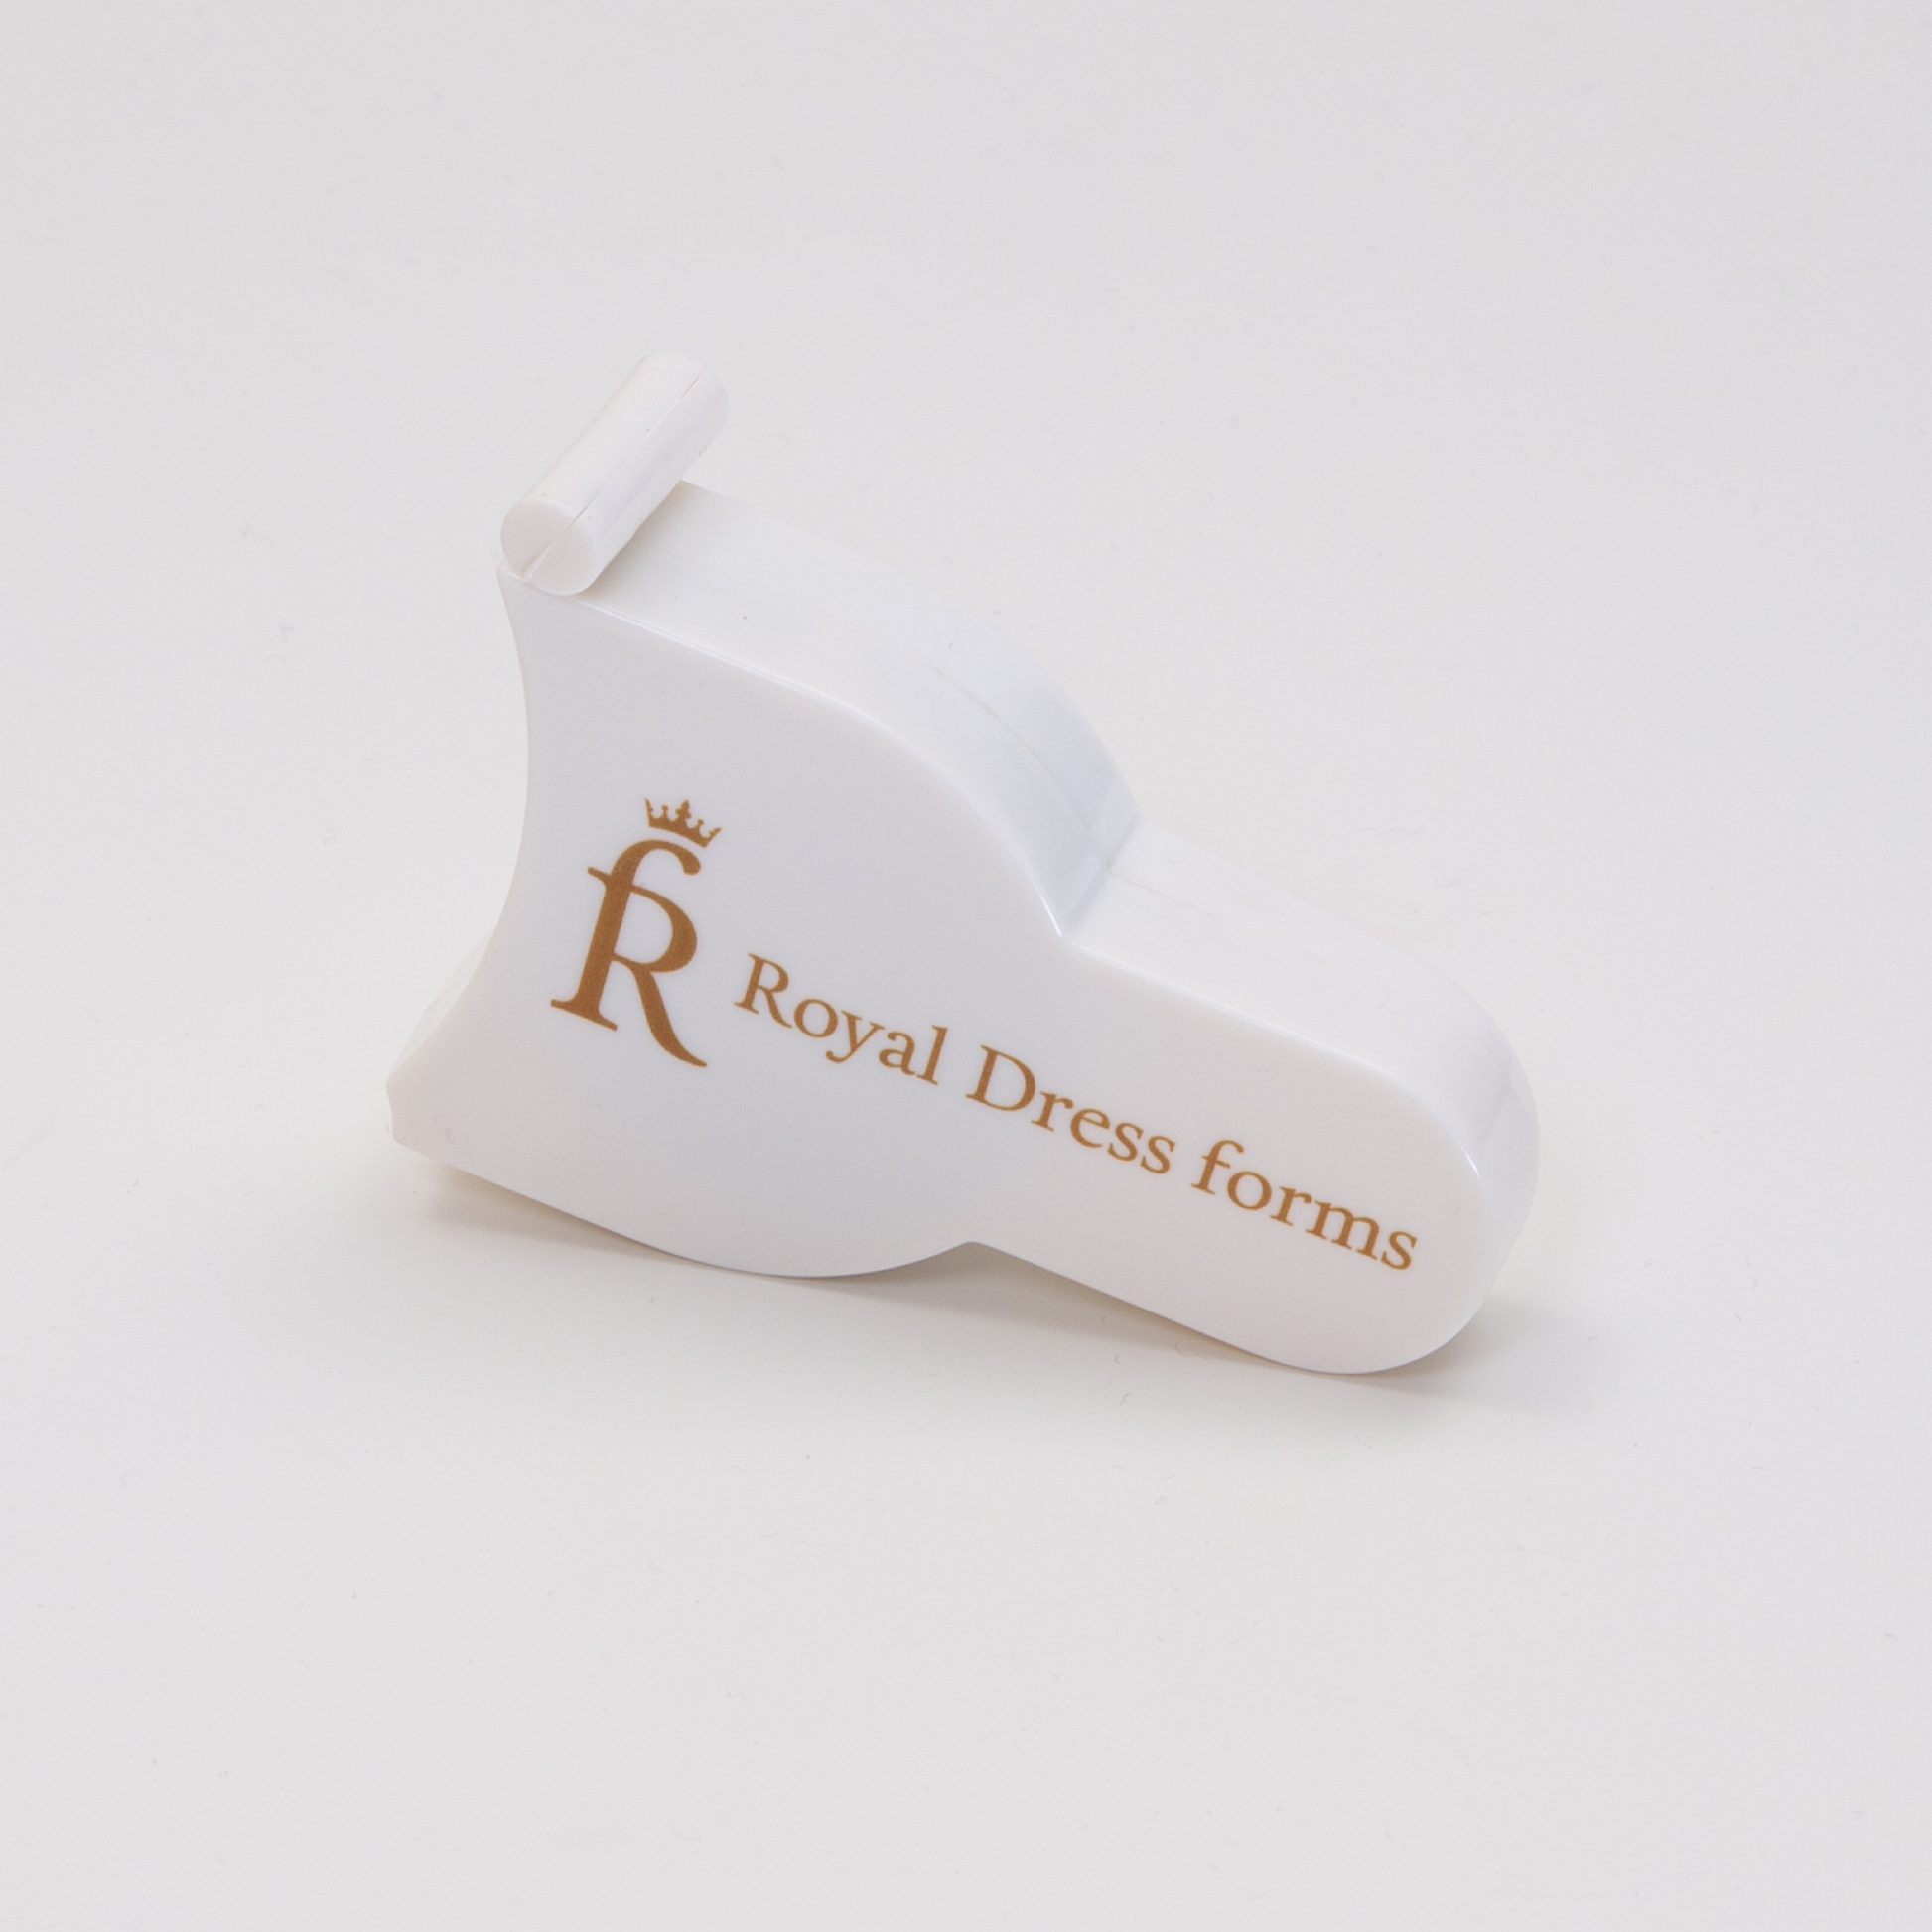 Measuring tape for body measurements with logo Royal Dress forms